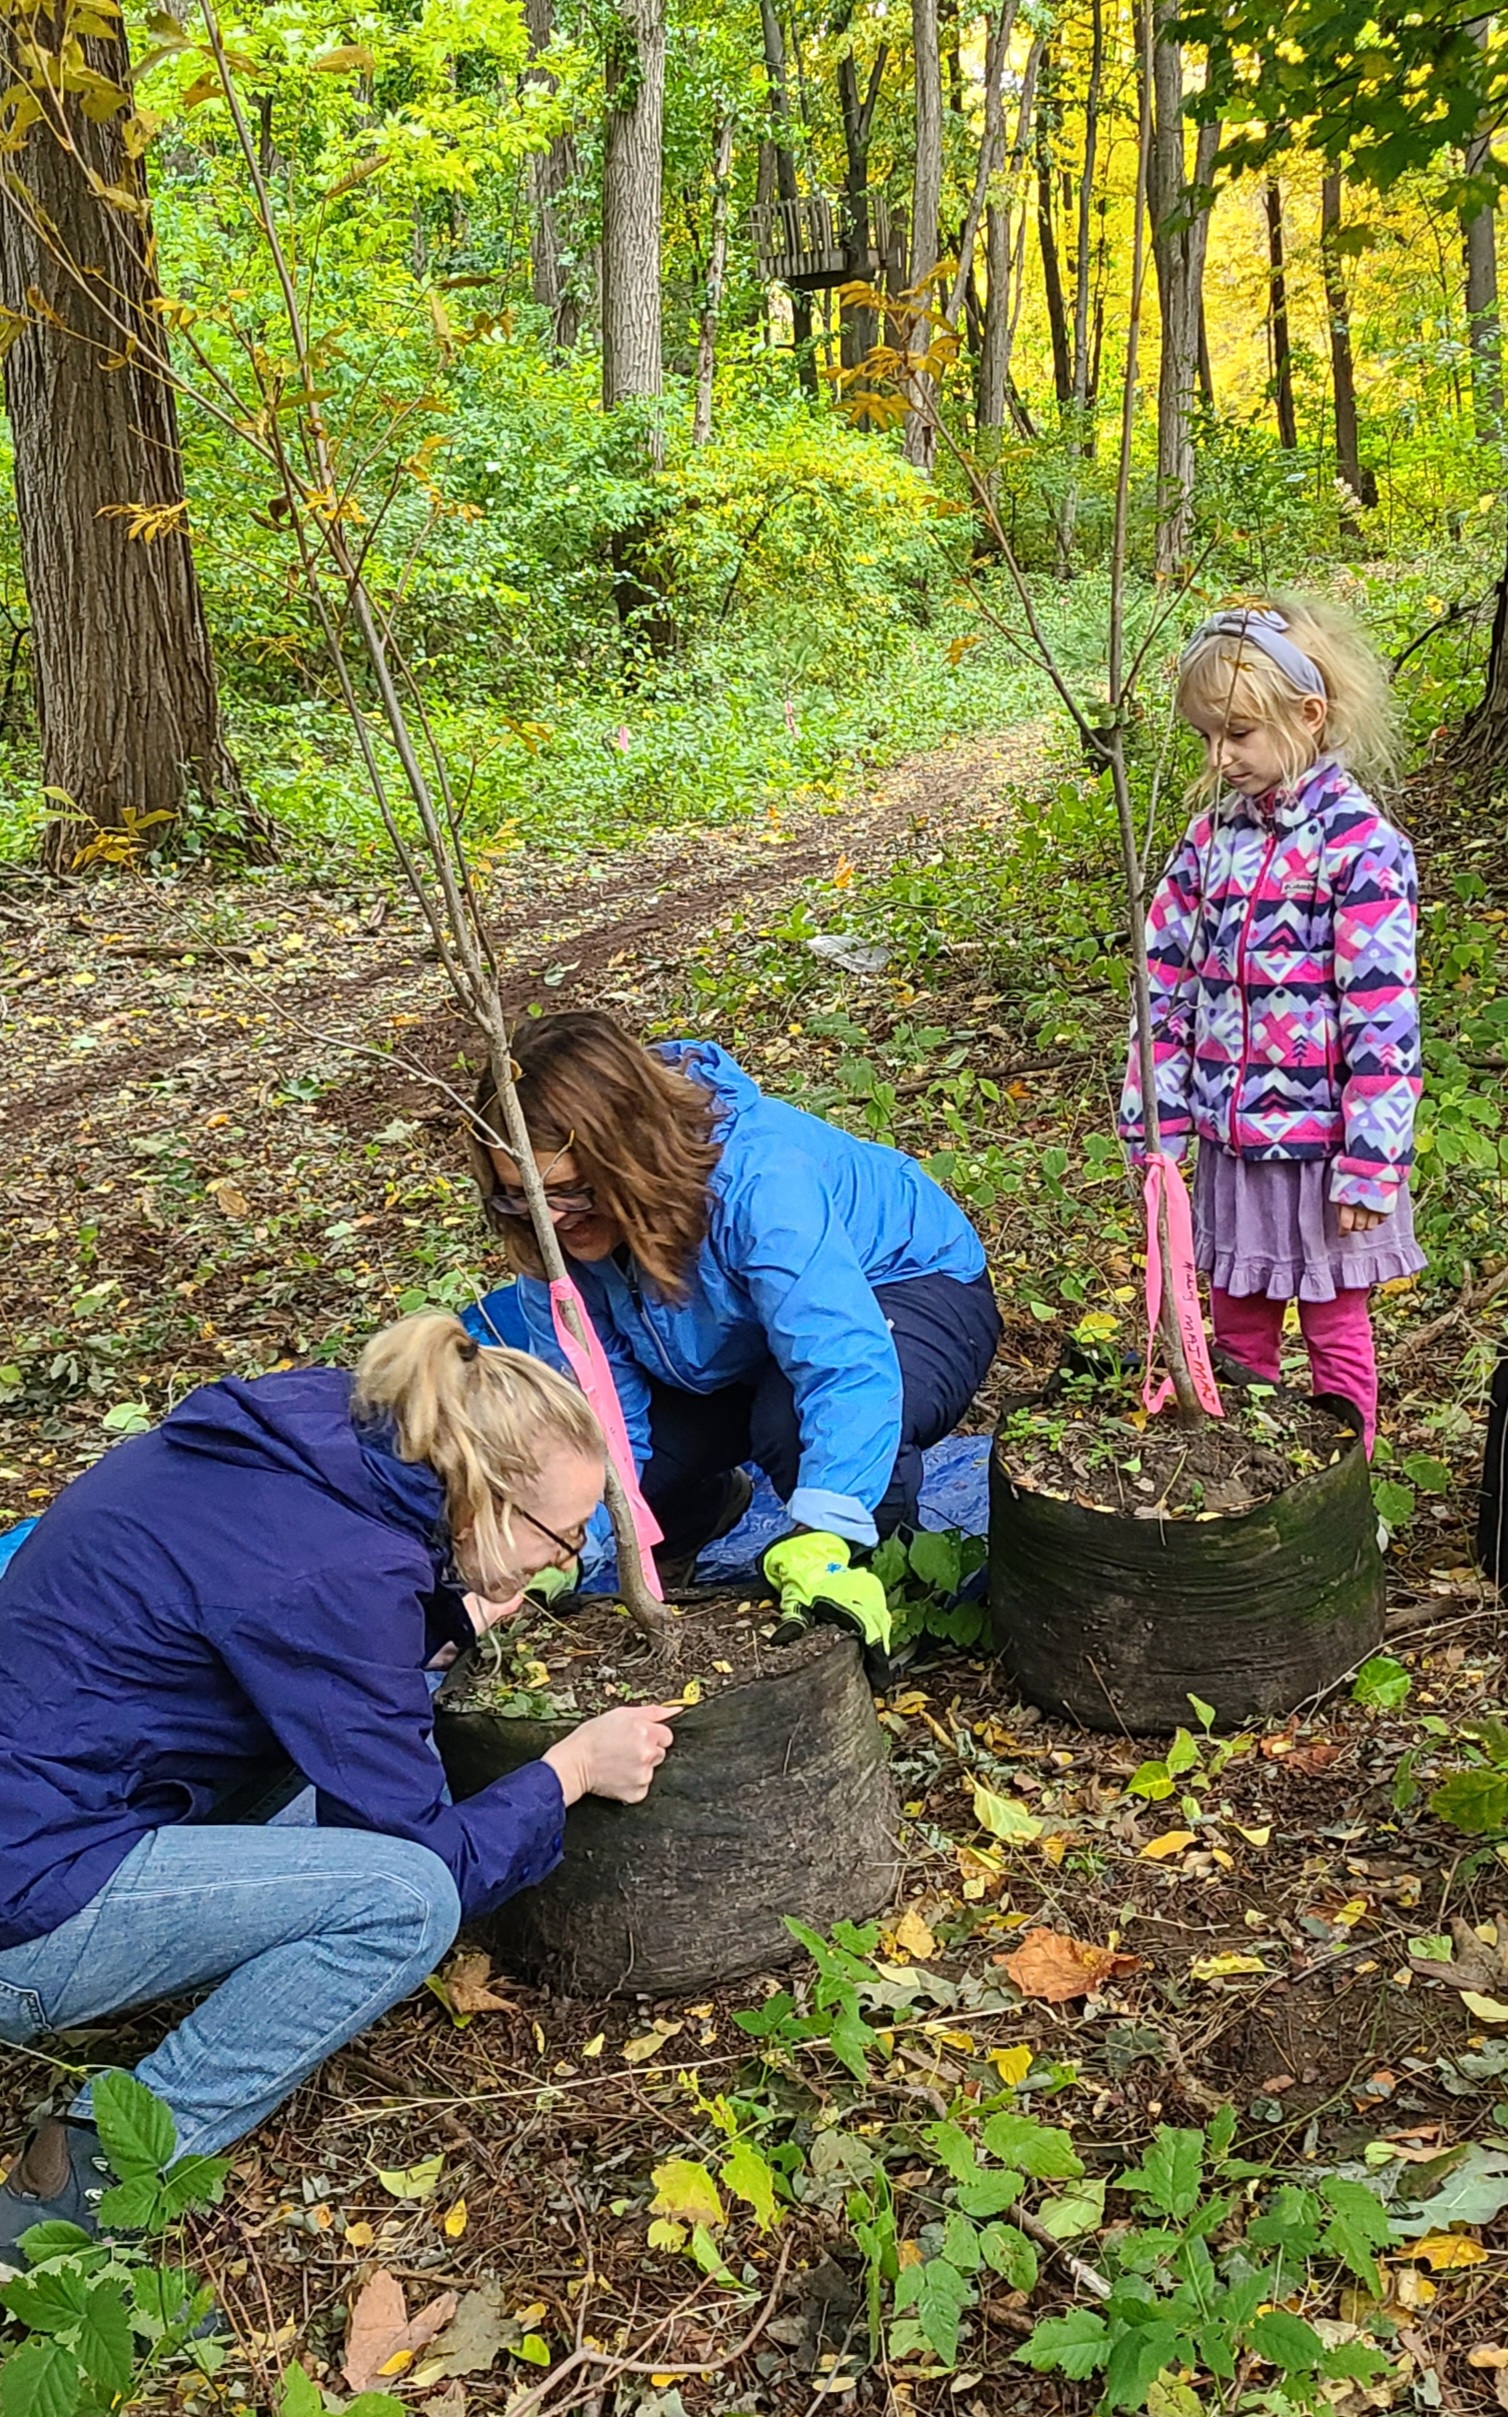 A child looks on while two women plant a sapling along the trail.